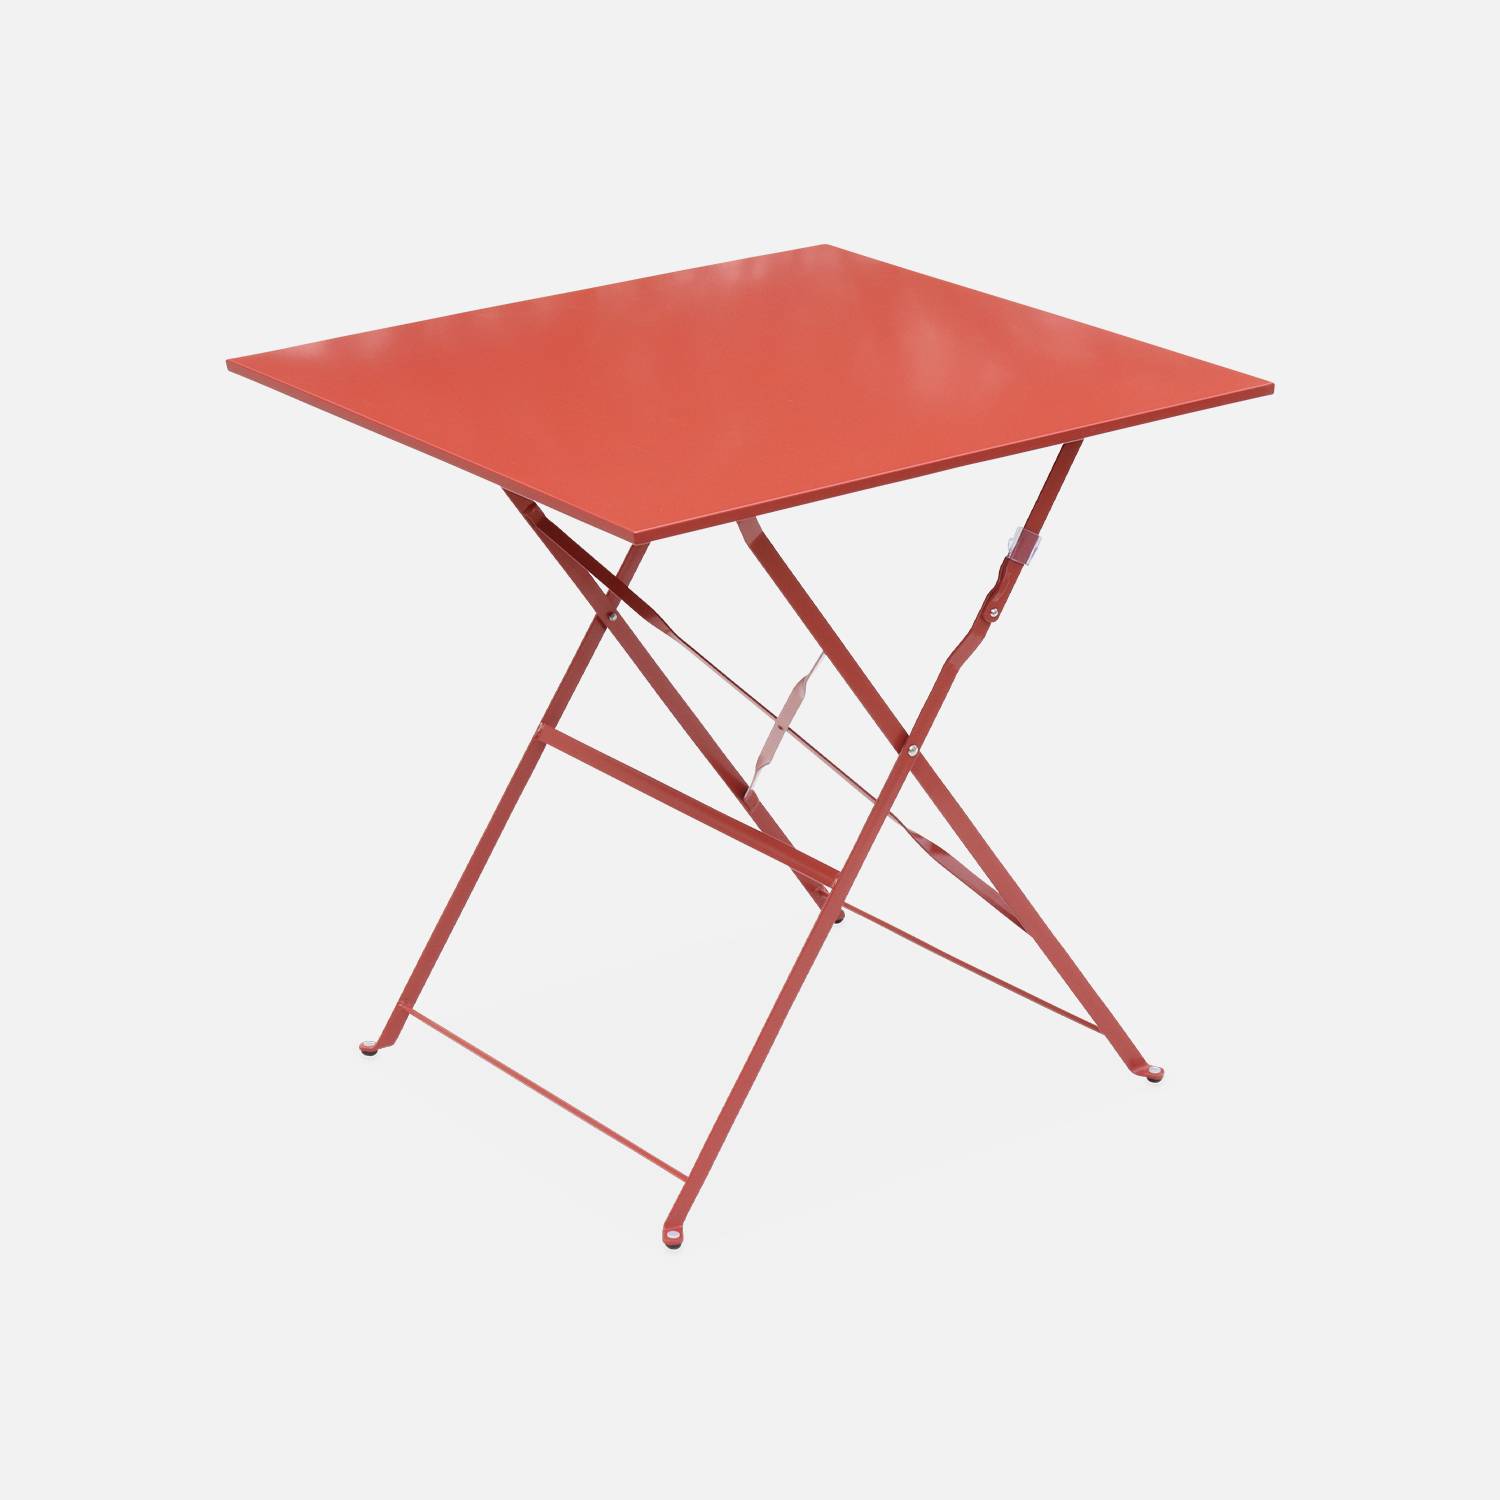 2-seater foldable thermo-lacquered steel bistro garden table, 70x70cm - Terracotta | sweeek